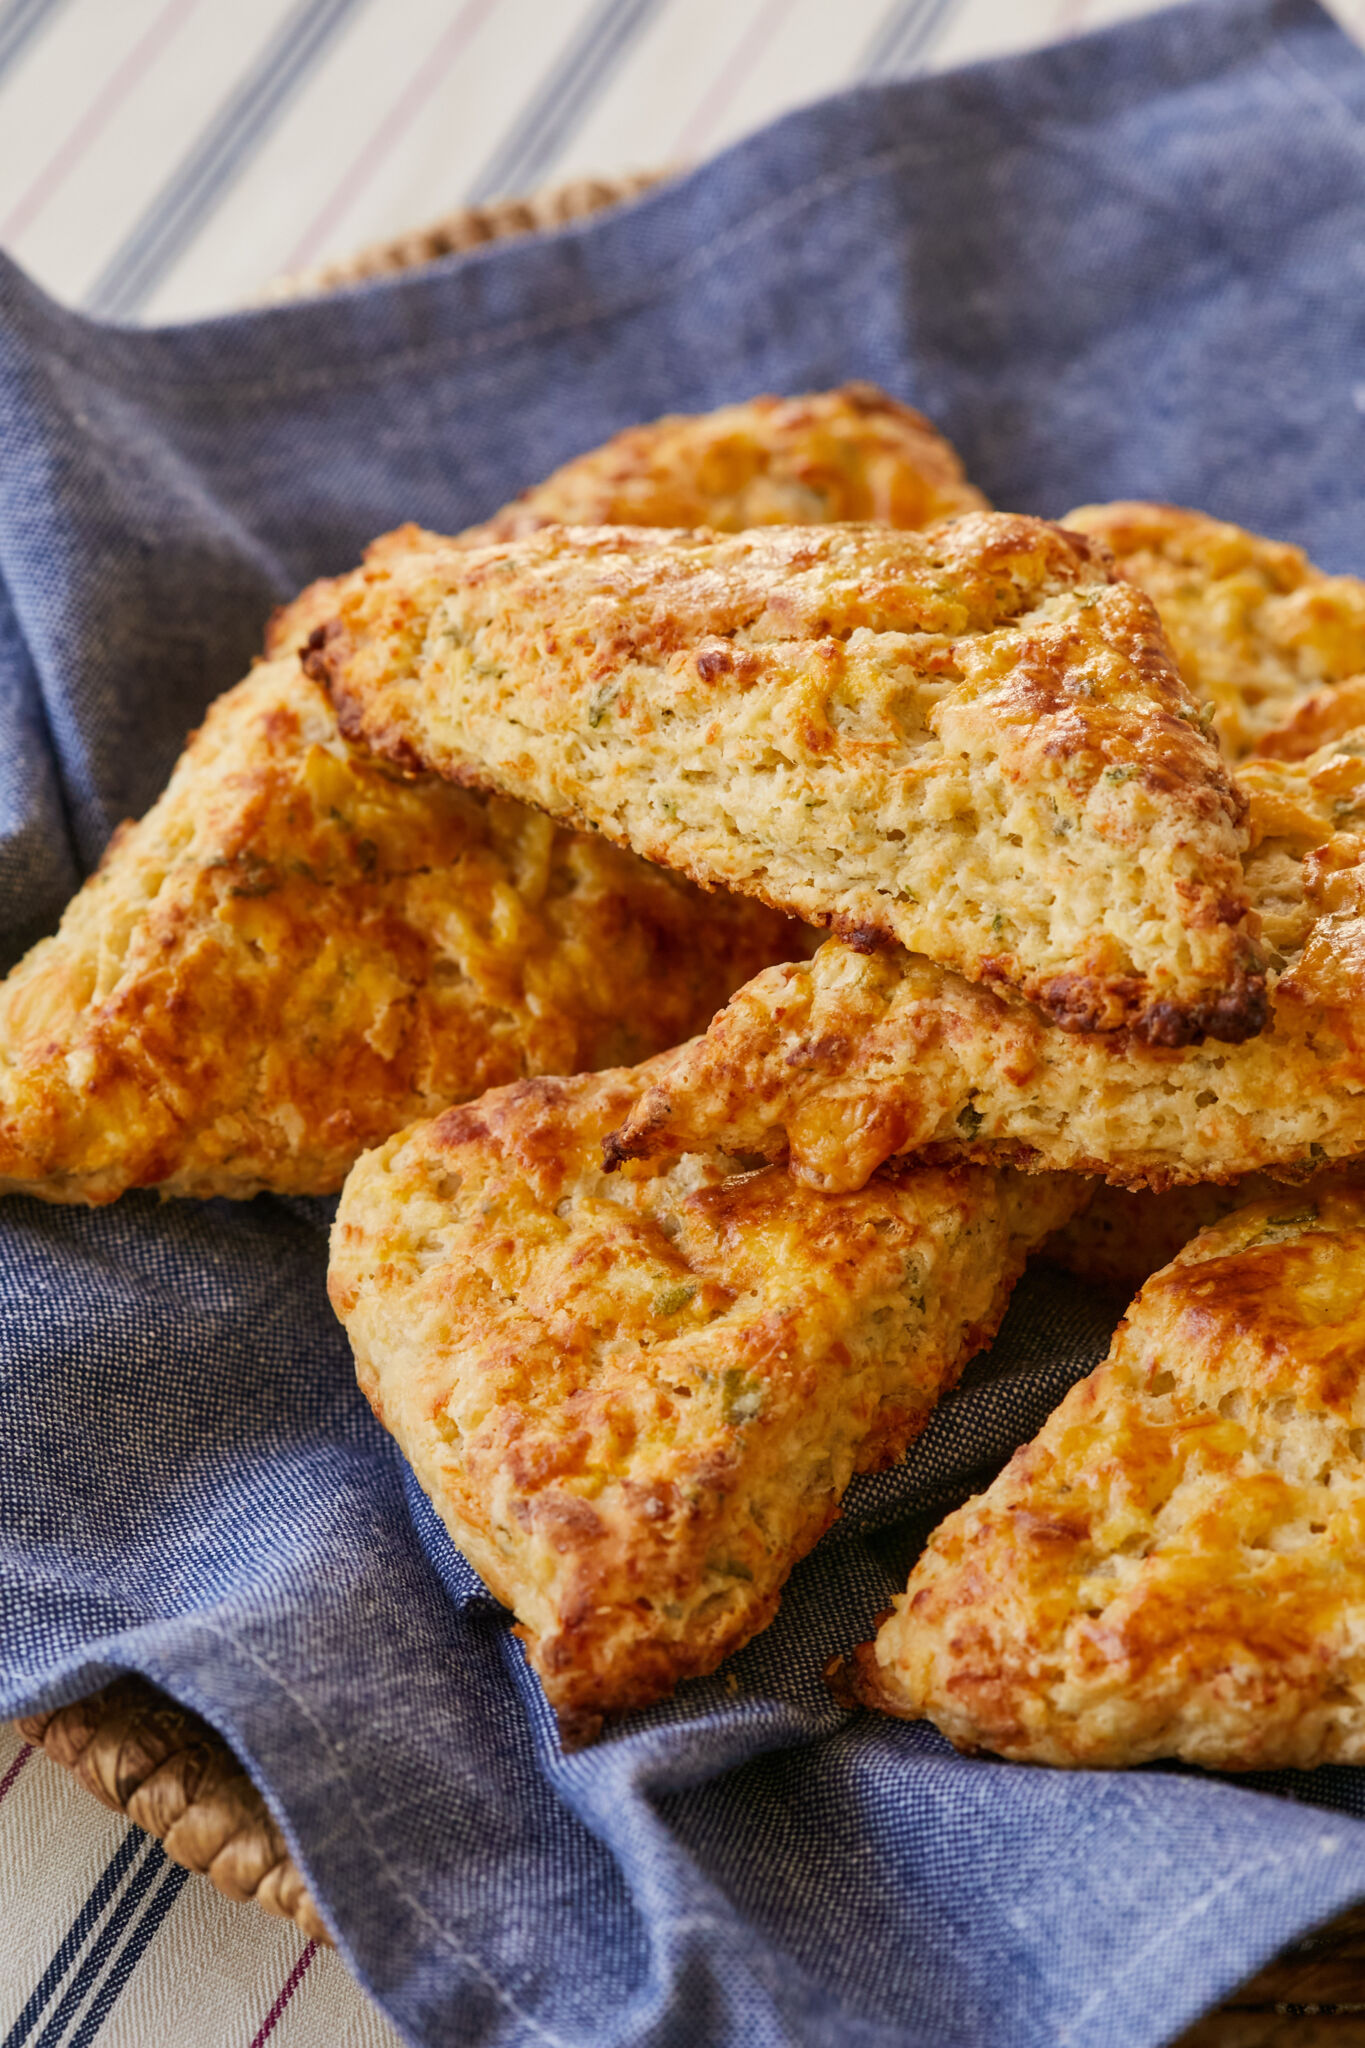 Apple Sage and Cheddar Scones are placed on a blue towel in a basket. They are baked to perfection with gorgeous golden brown color and crispy exterior all around with a crumbly soft interior. 